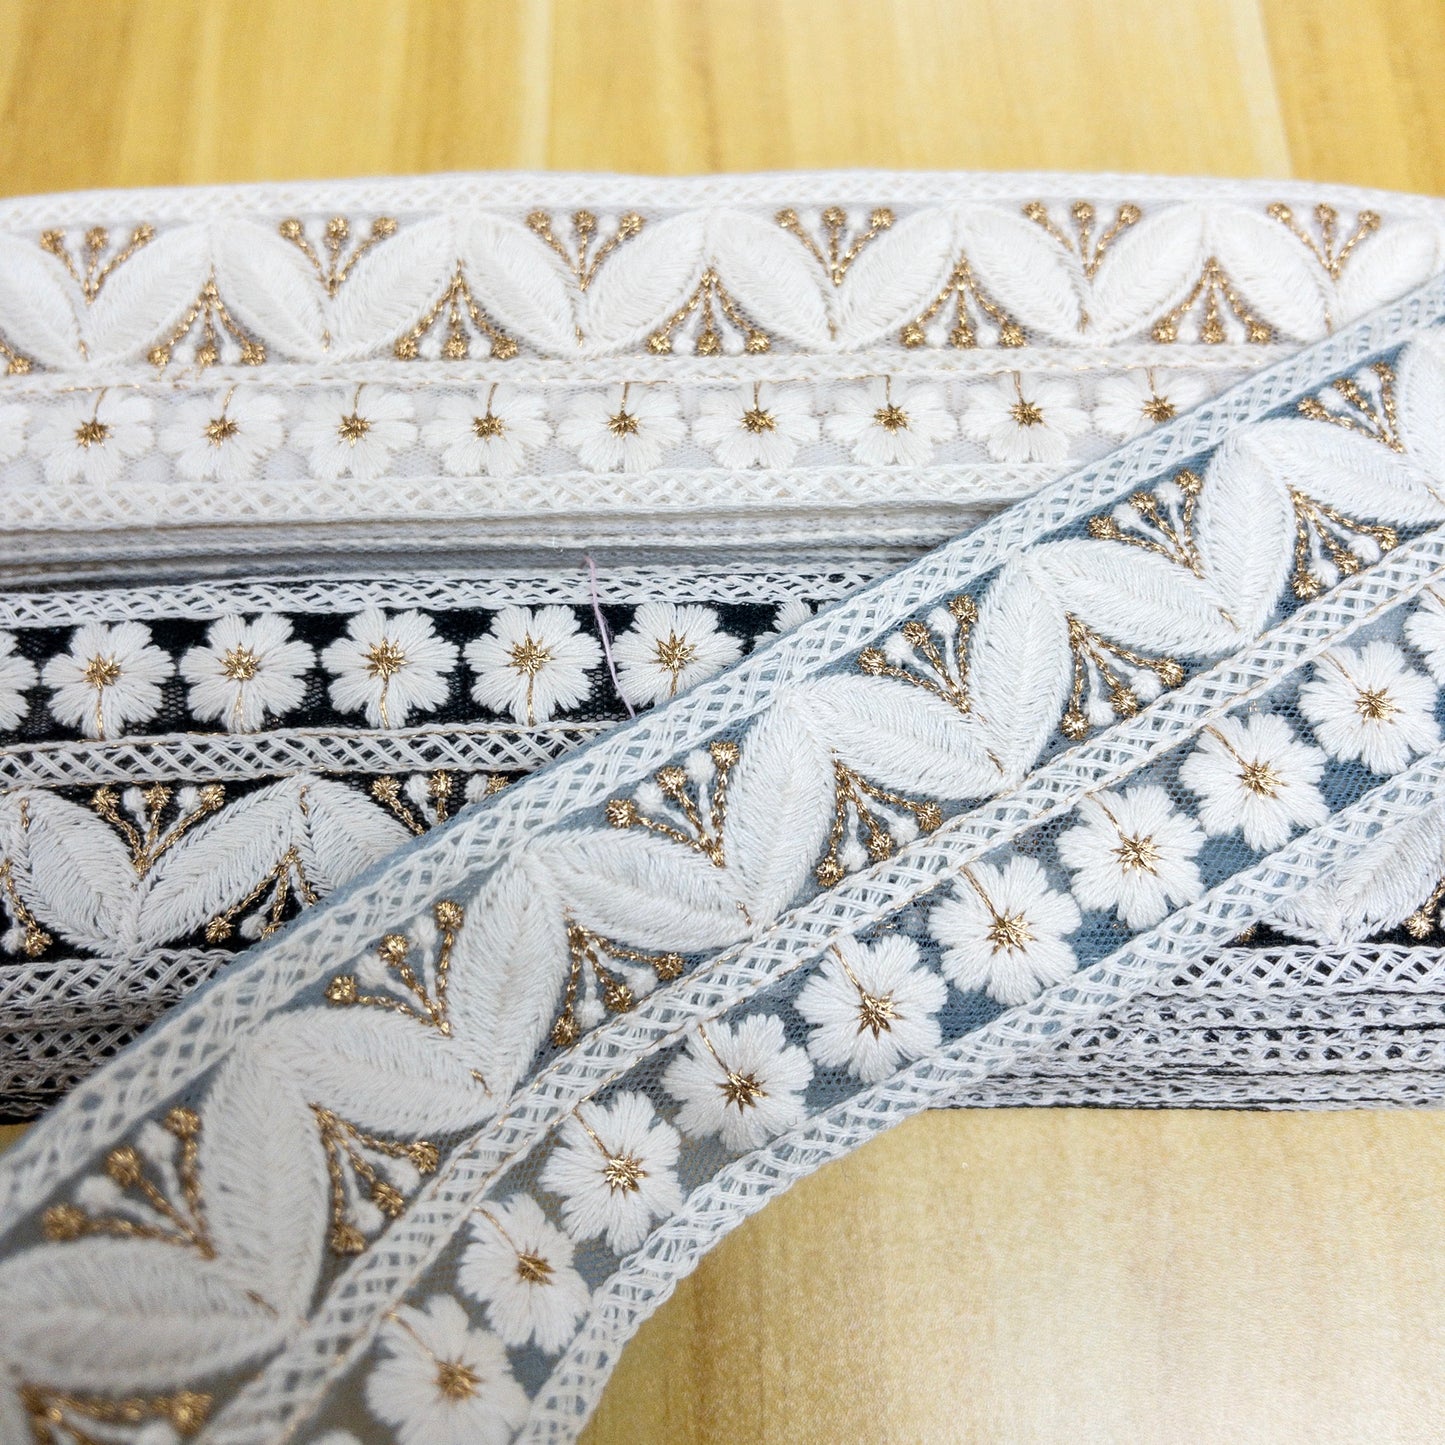 embroidery webbing 刺繡帶 | small white flowers and leaves 小白花朵和葉 5cm